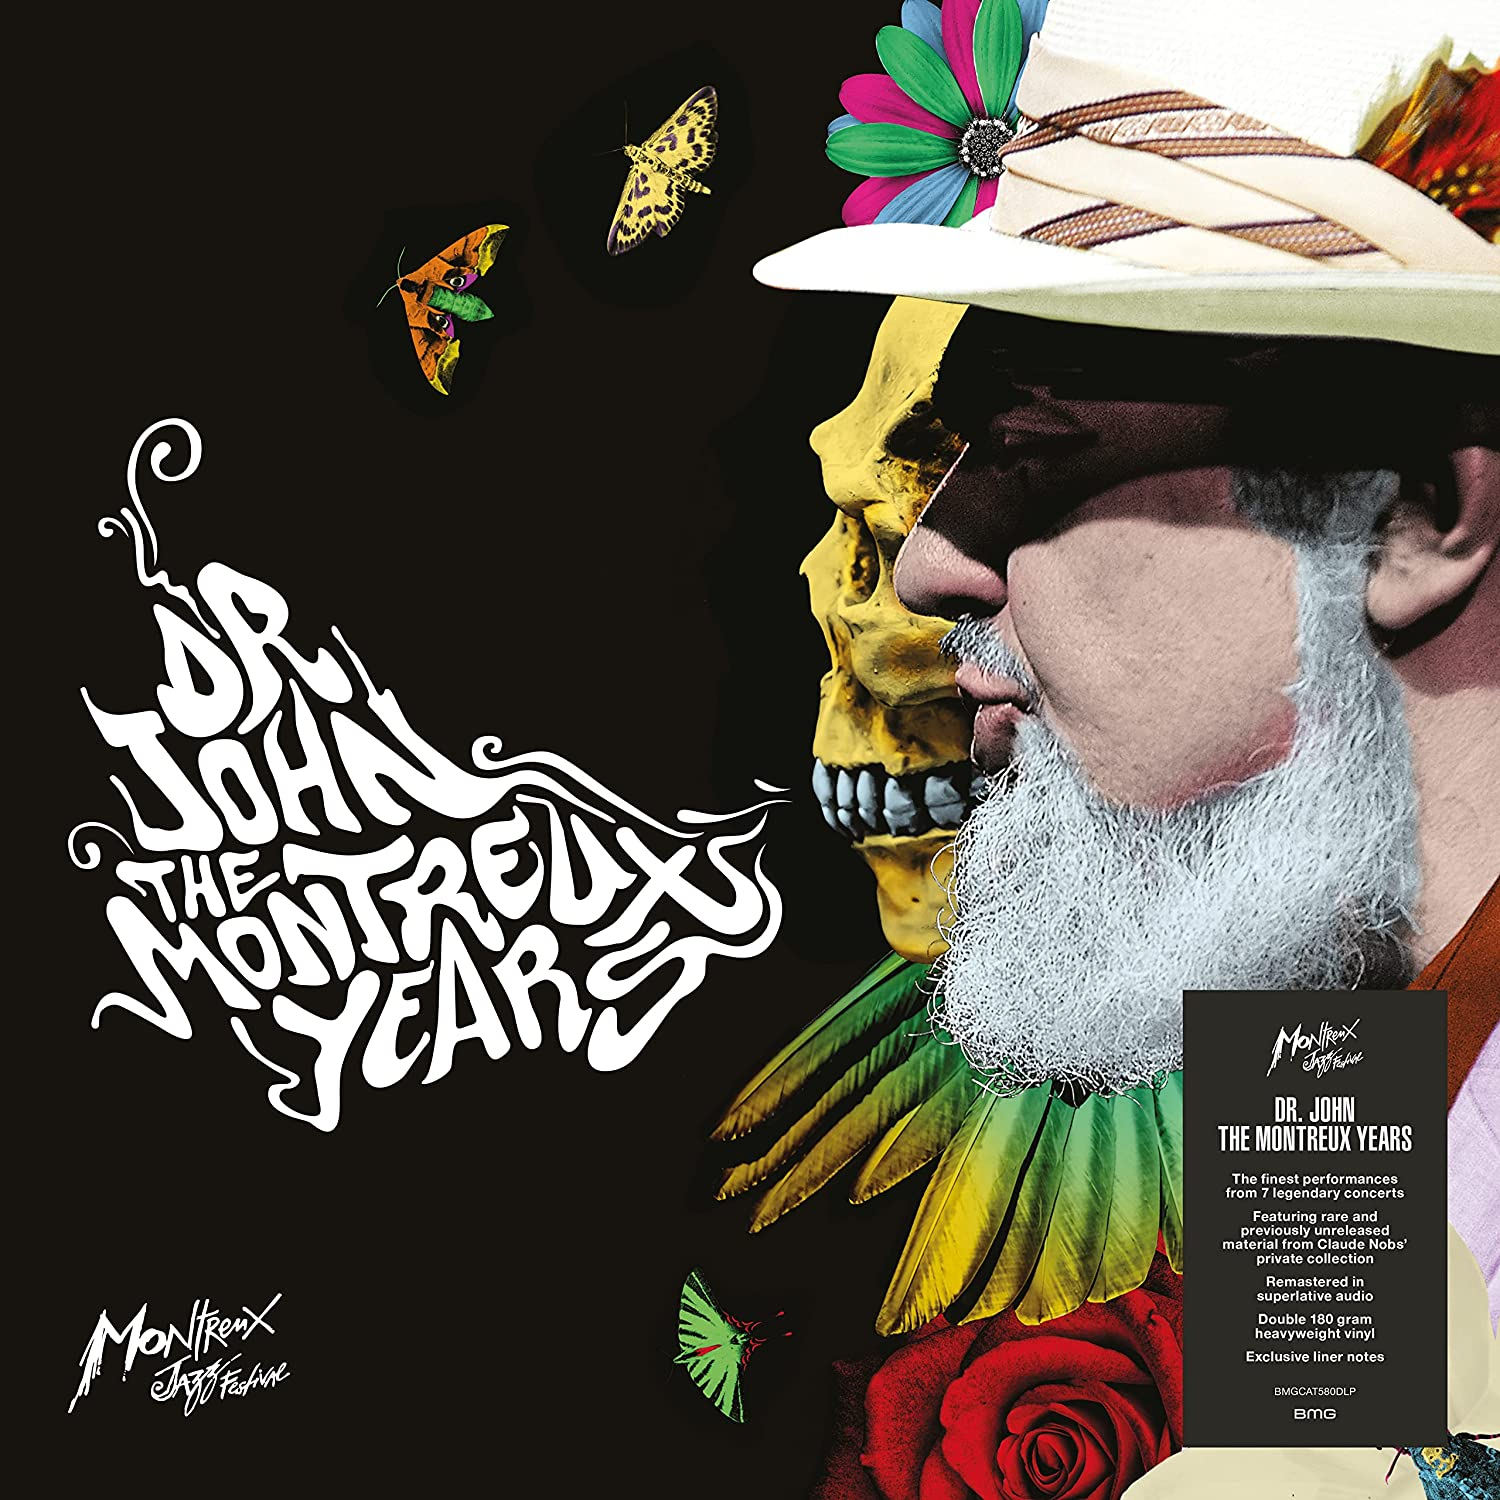 DR. JOHN: THE MONTREUX YEARS